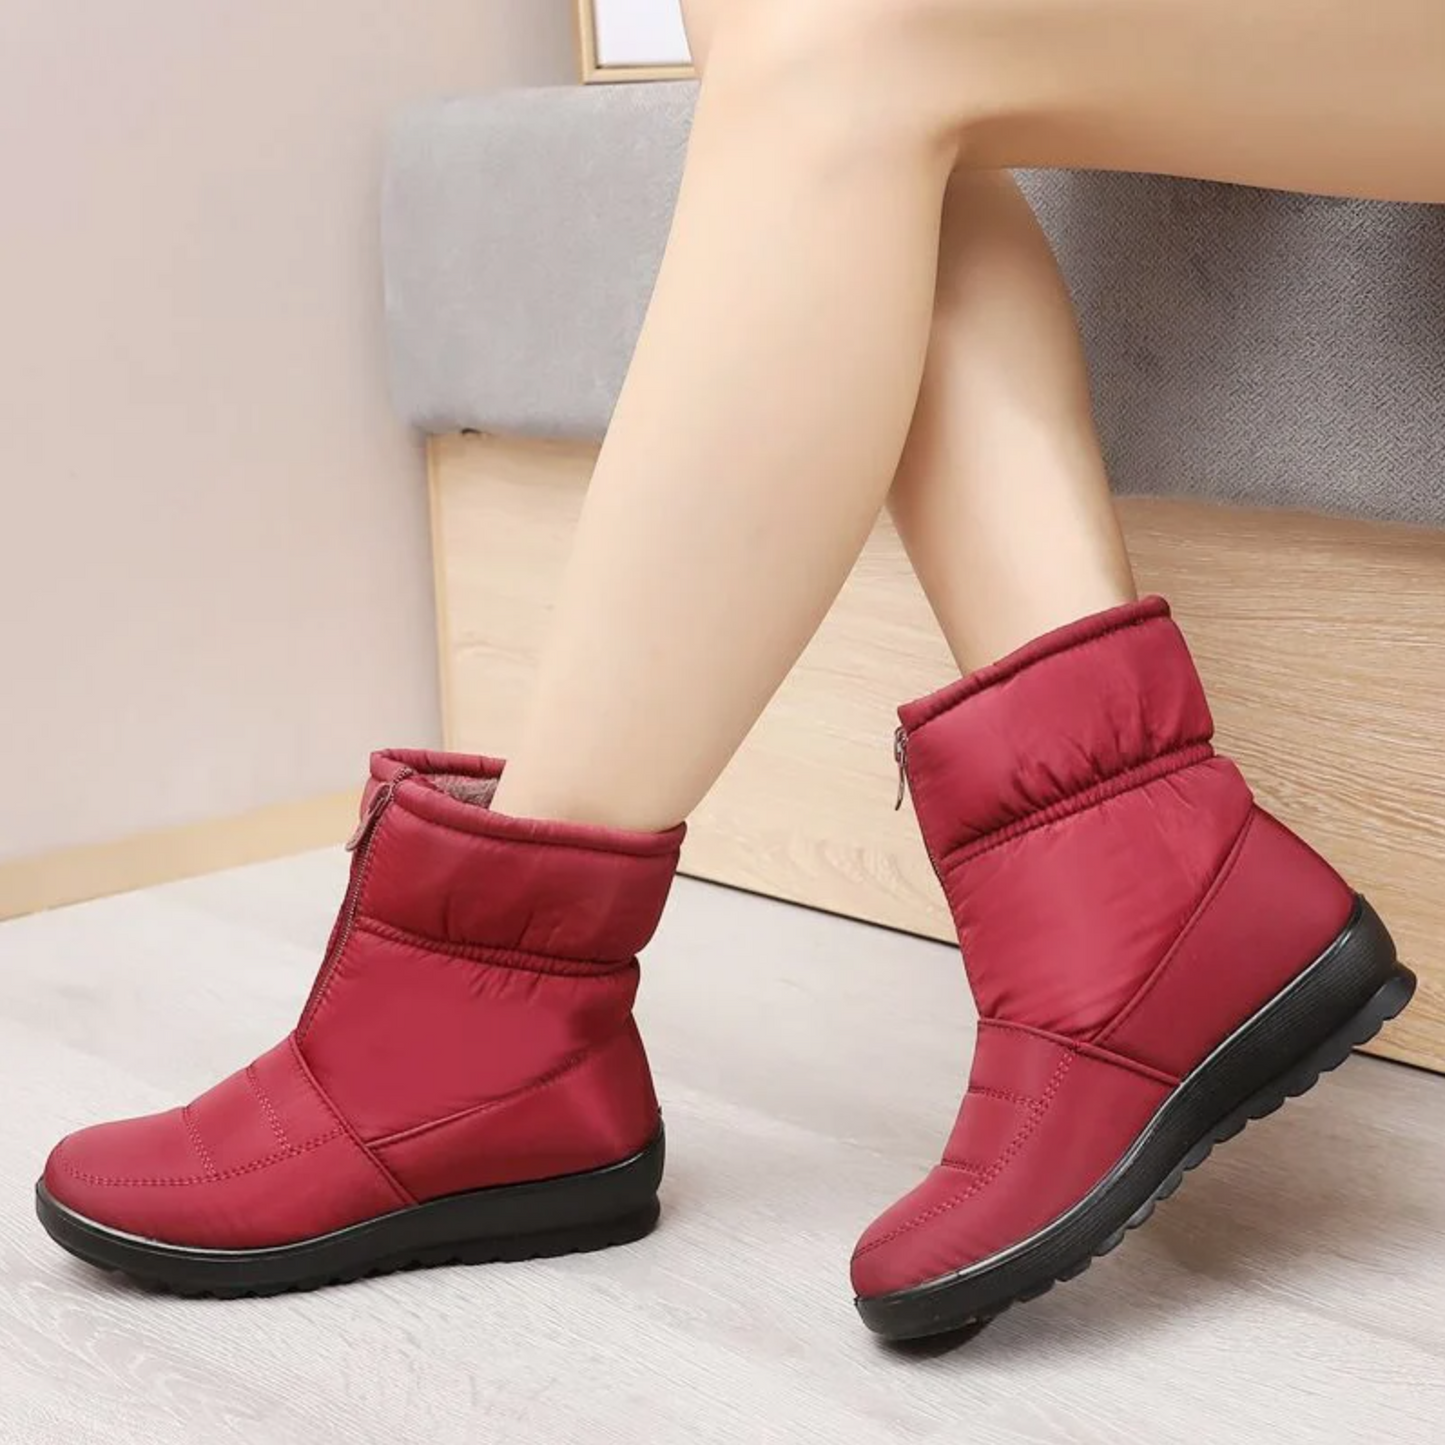 🔥2022 Women's Warm Snow Boots, Fur Lining Water Resistant Winter Shoes🎉